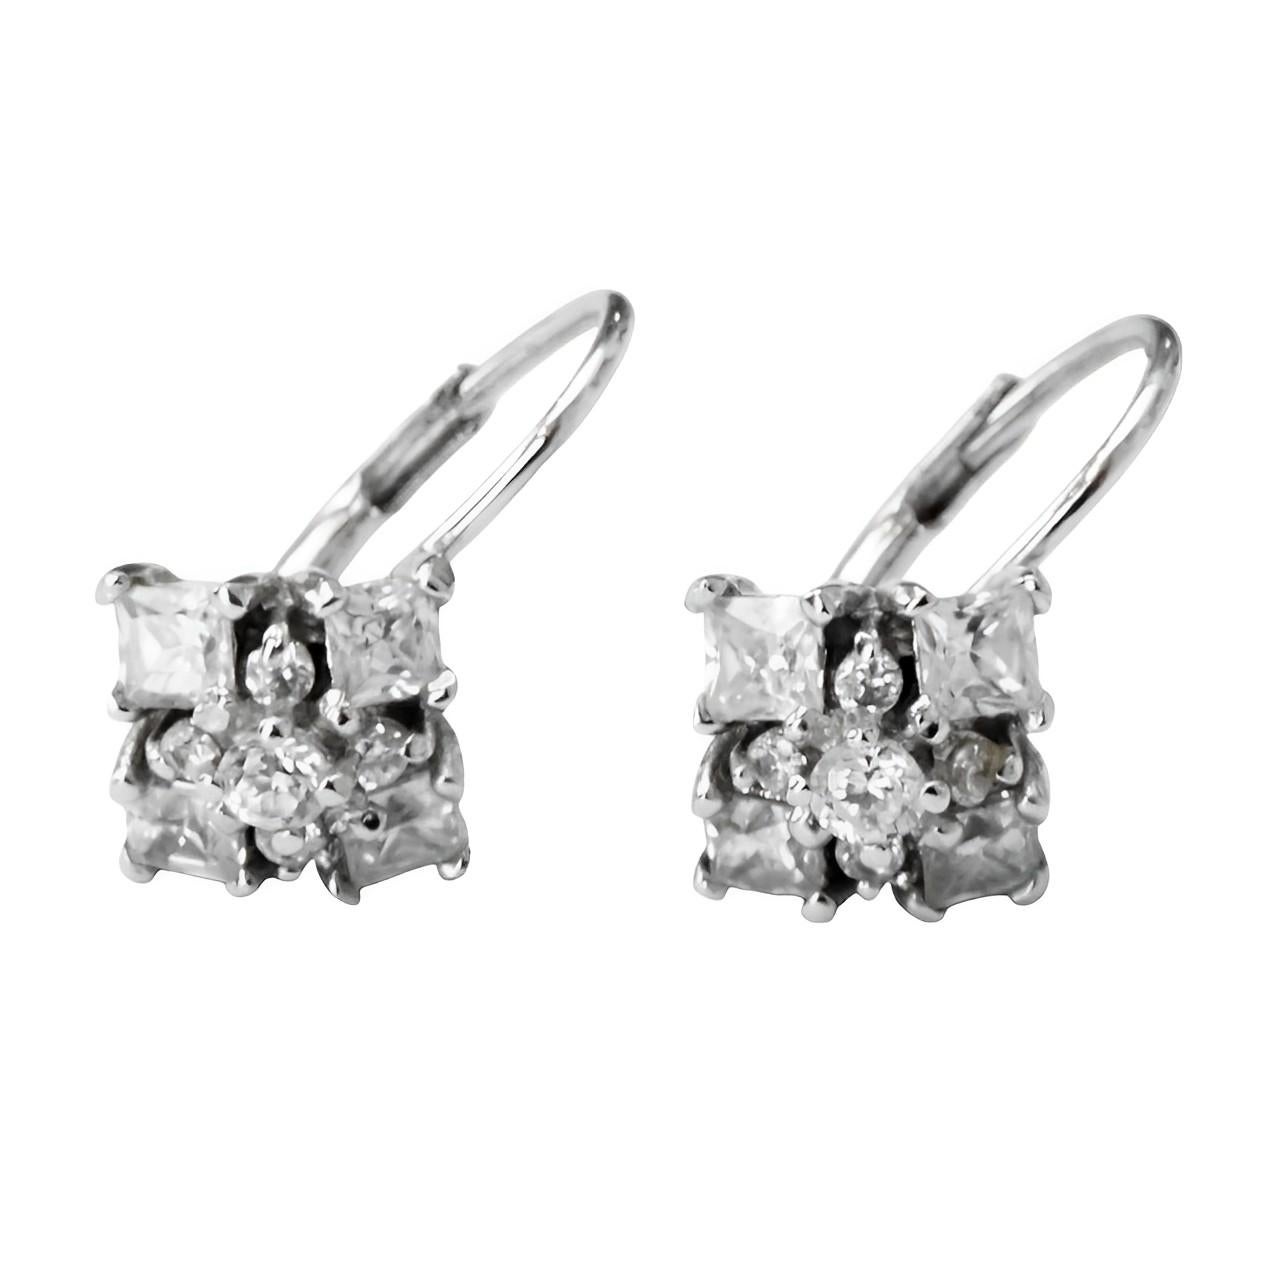 Sterling Silver and Rhinestone Lever Back Earrings For Sale 1